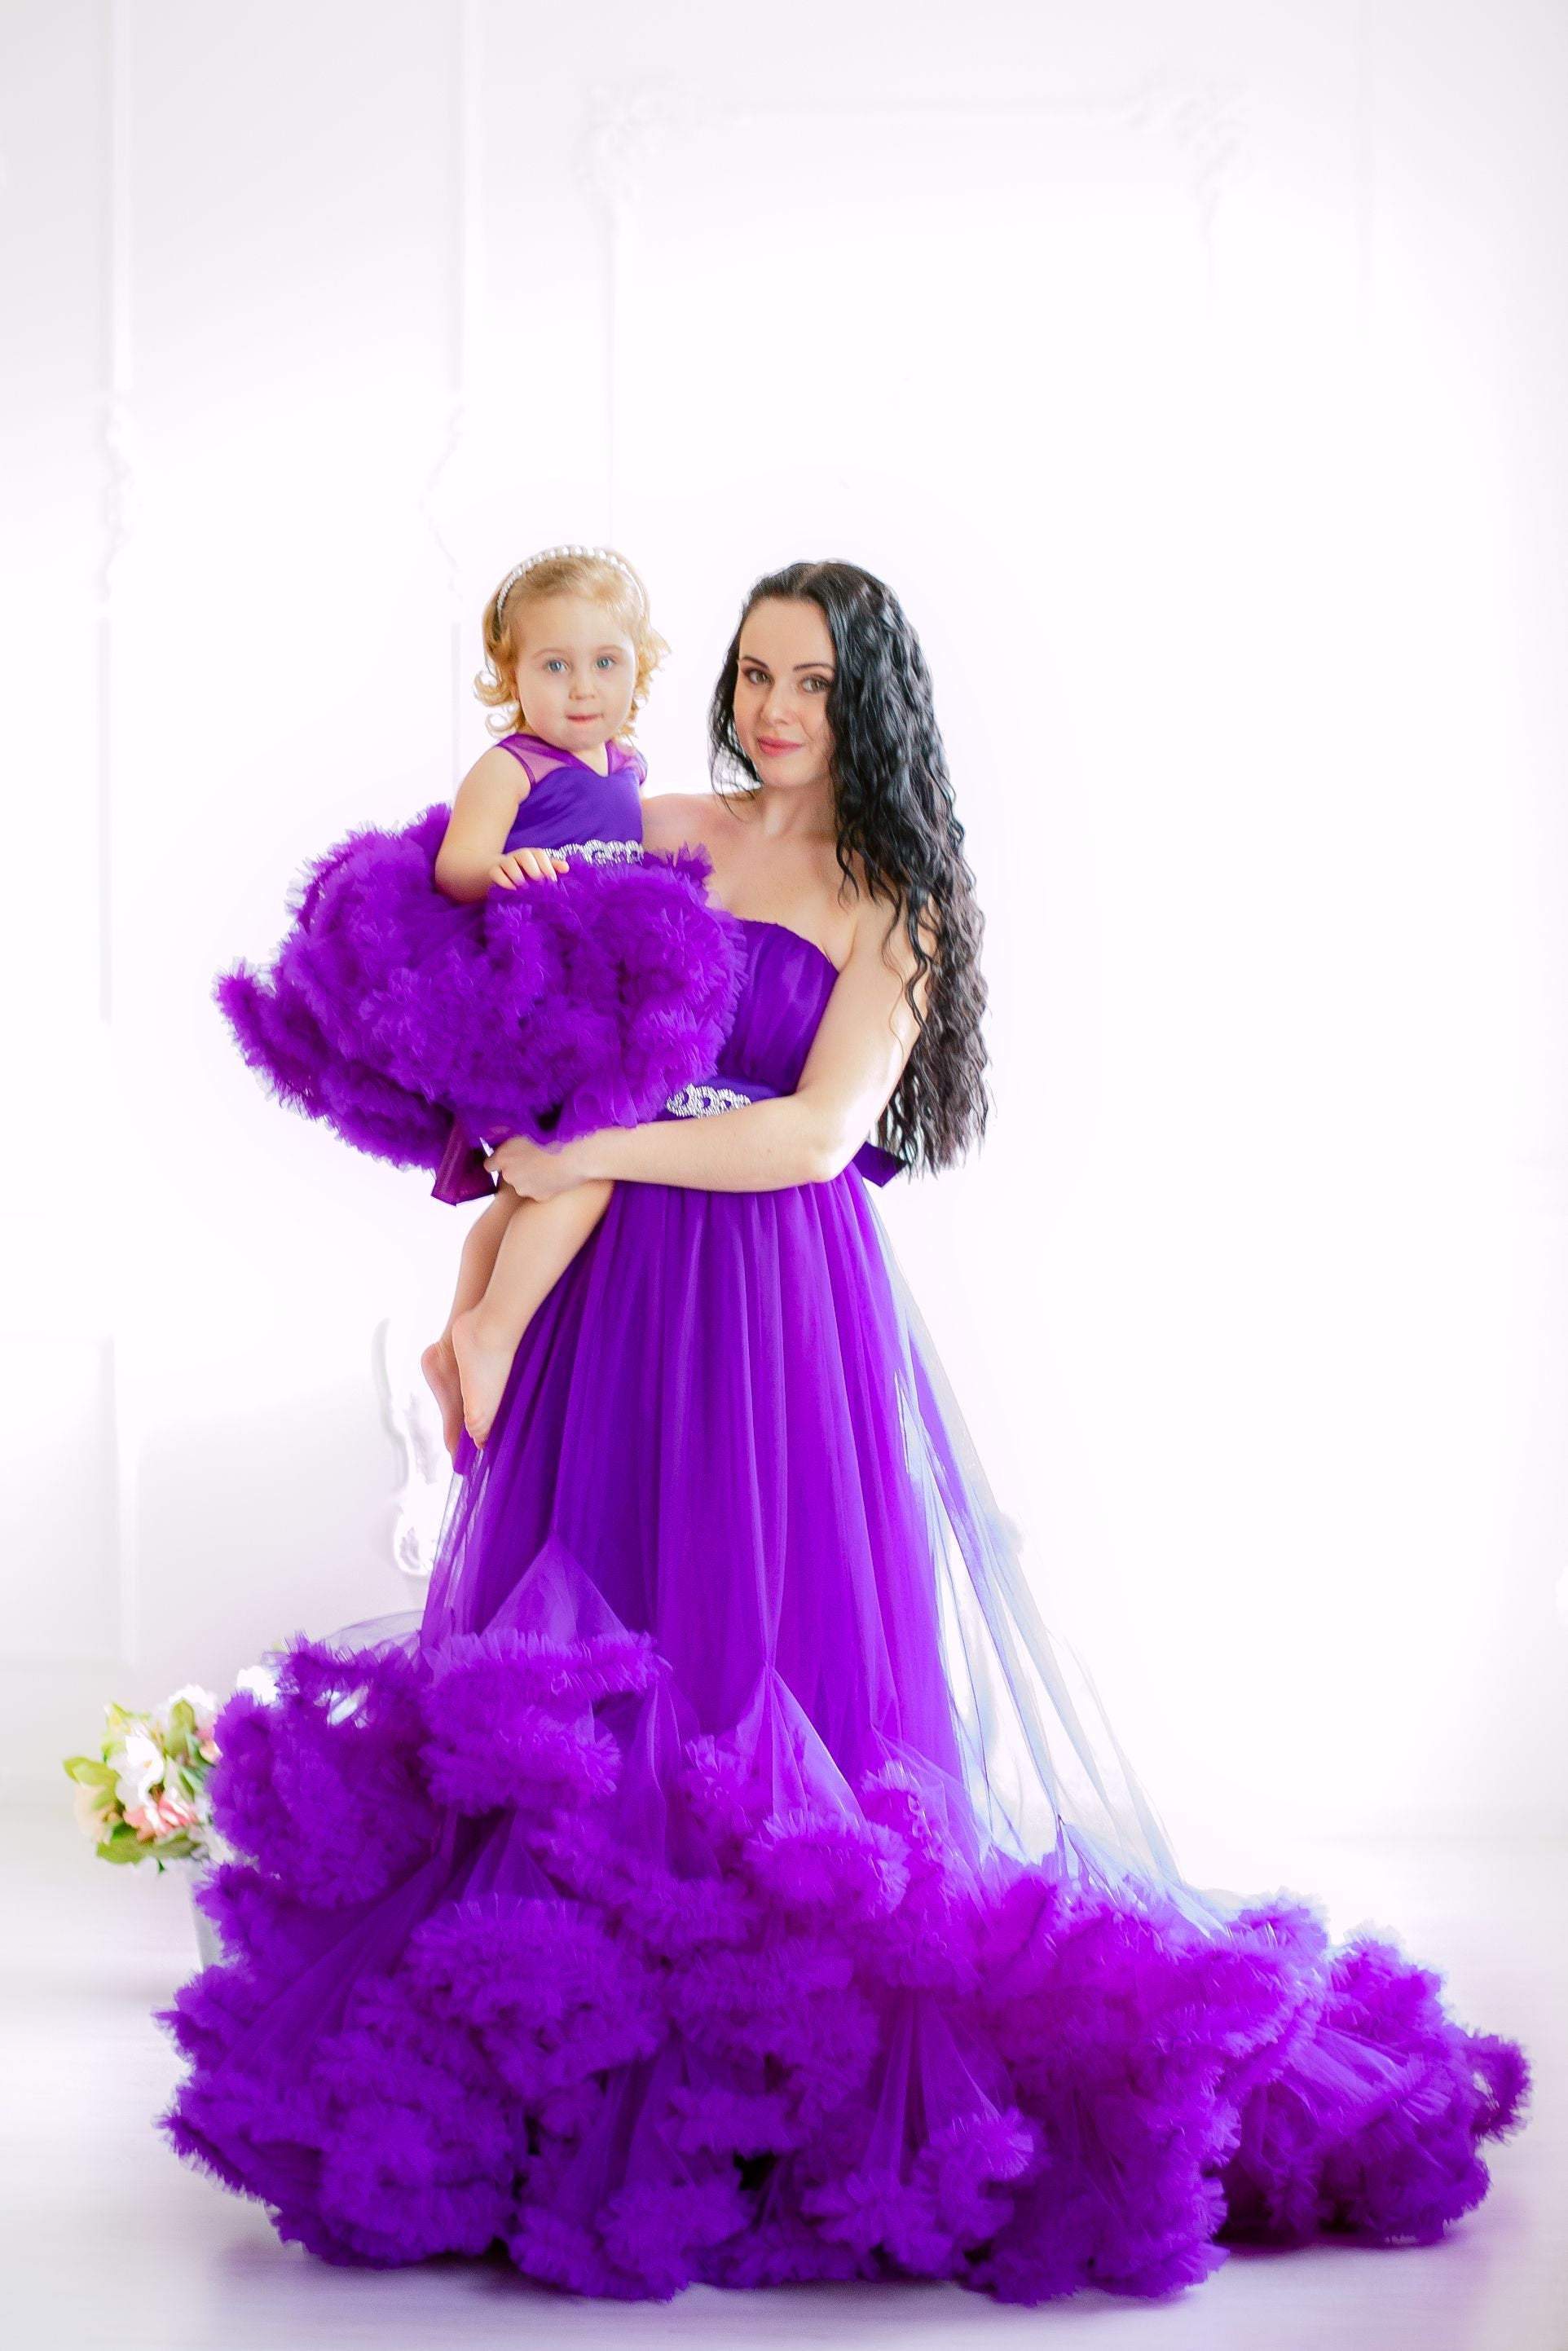 Soft and beautiful Ruffle Ball Gown dress for girls